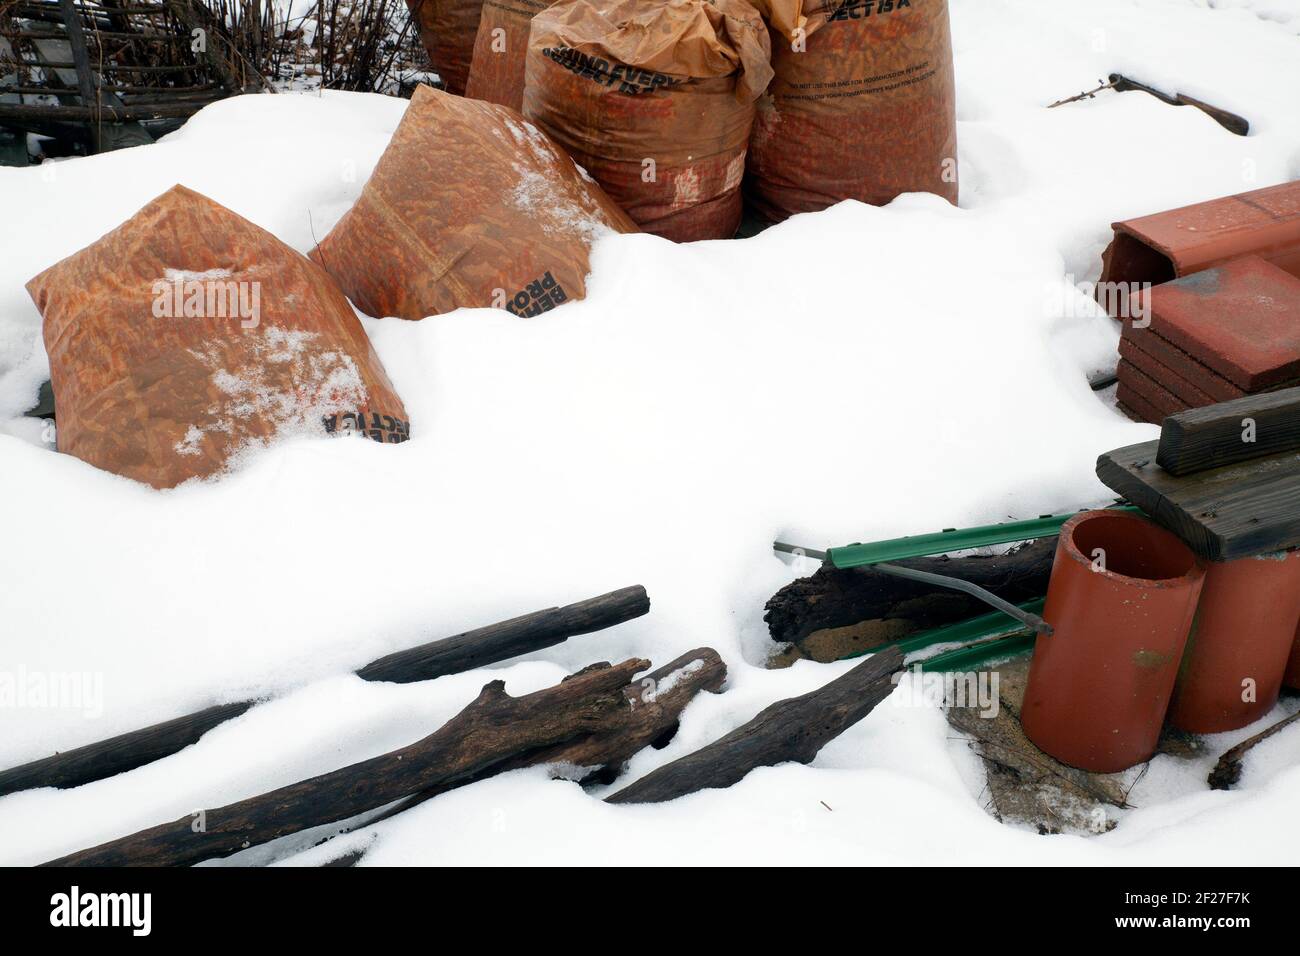 New England community garden in the winter. Stock Photo